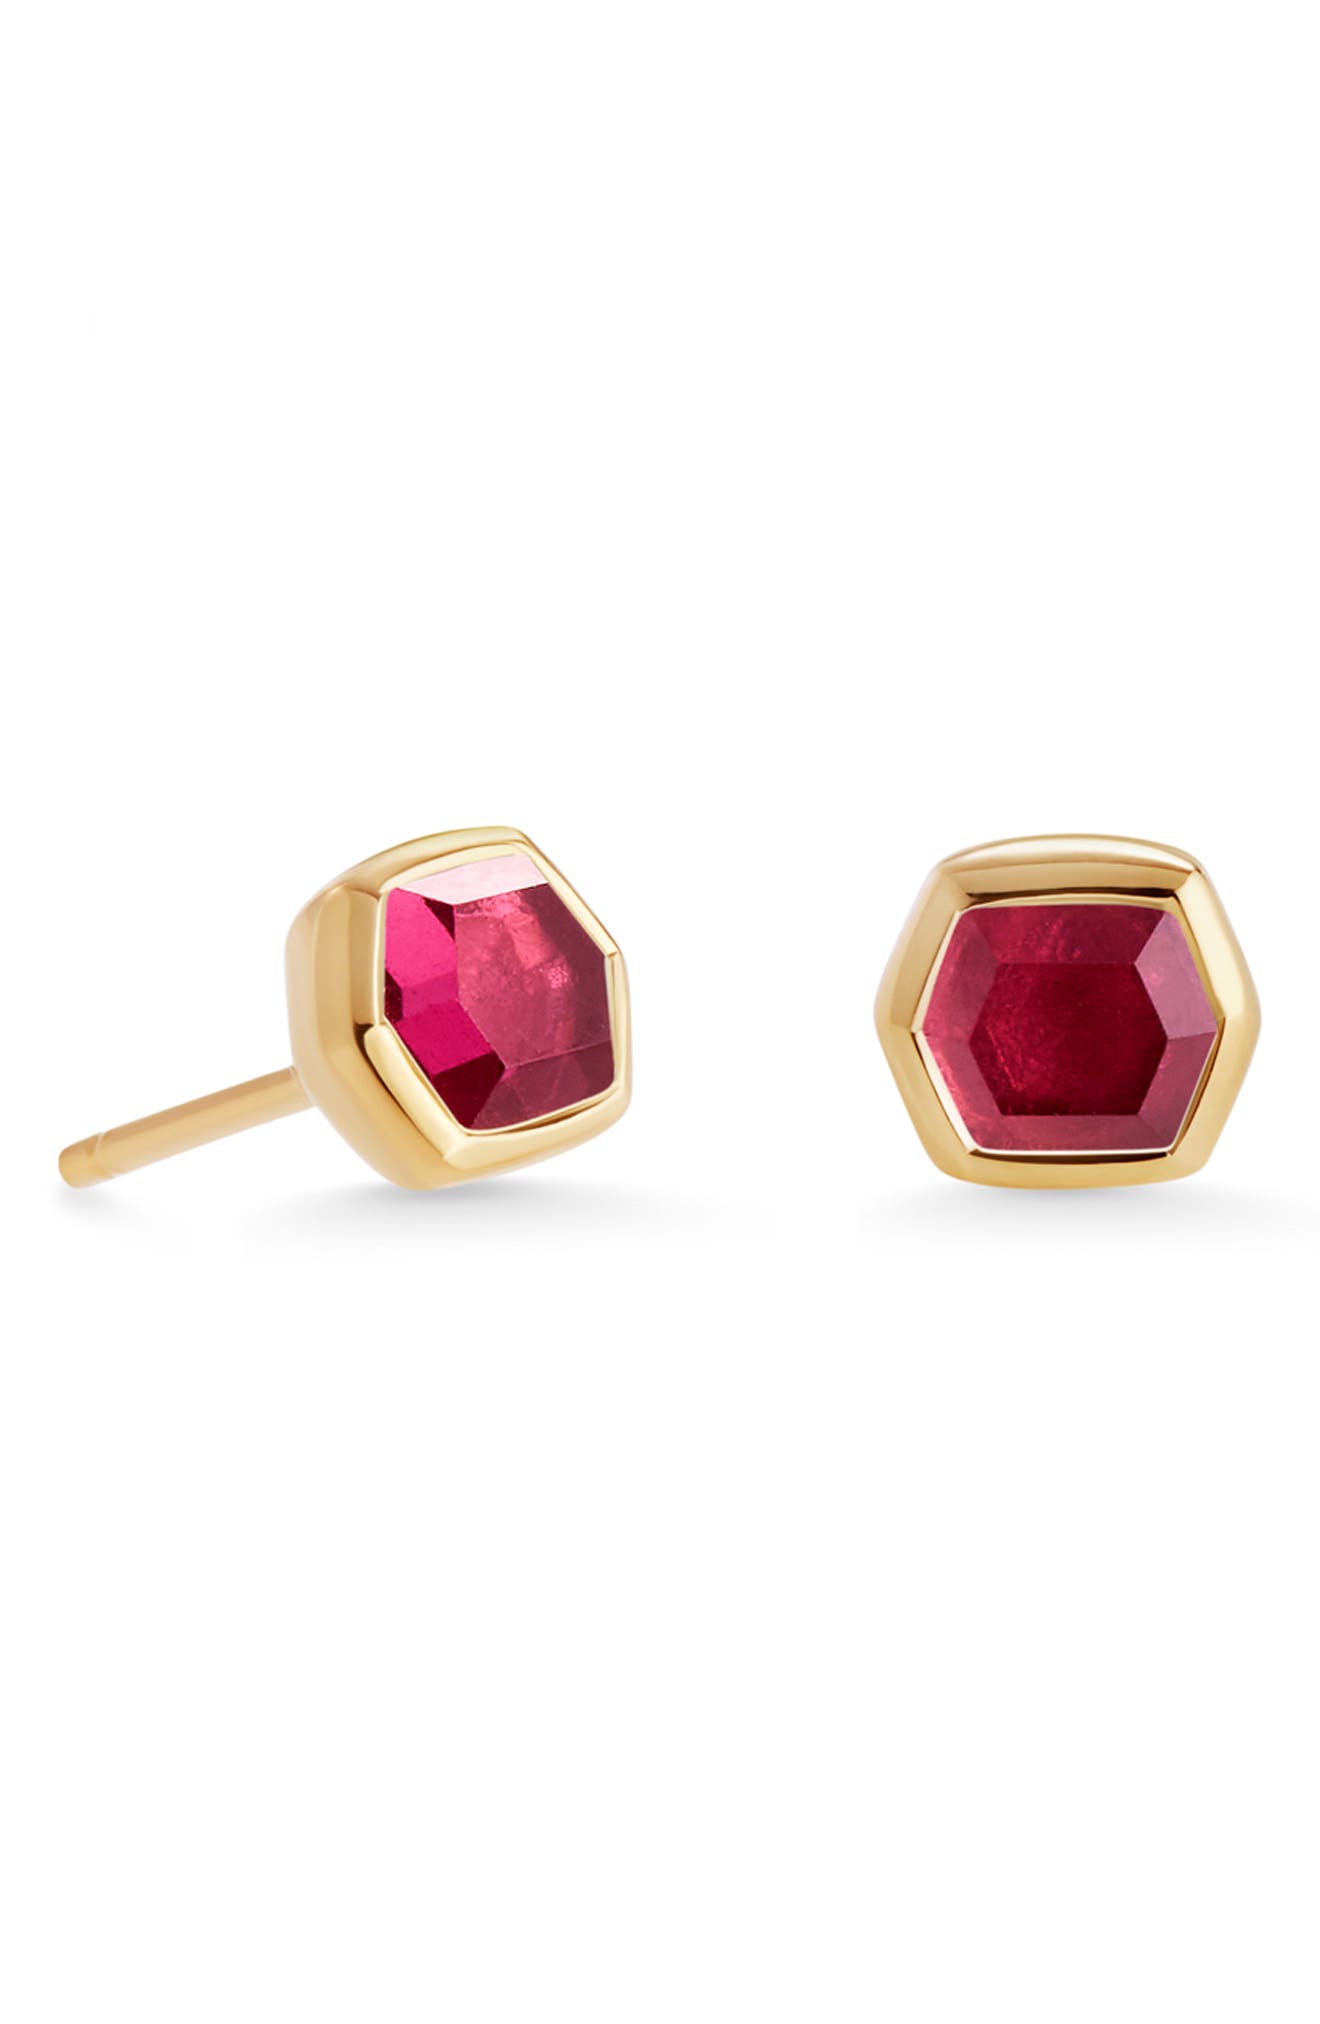 Gem Stone King 18K Rose Gold Plated Silver Stud Earring Made with Fancy Pink Swarovksi Zirconia